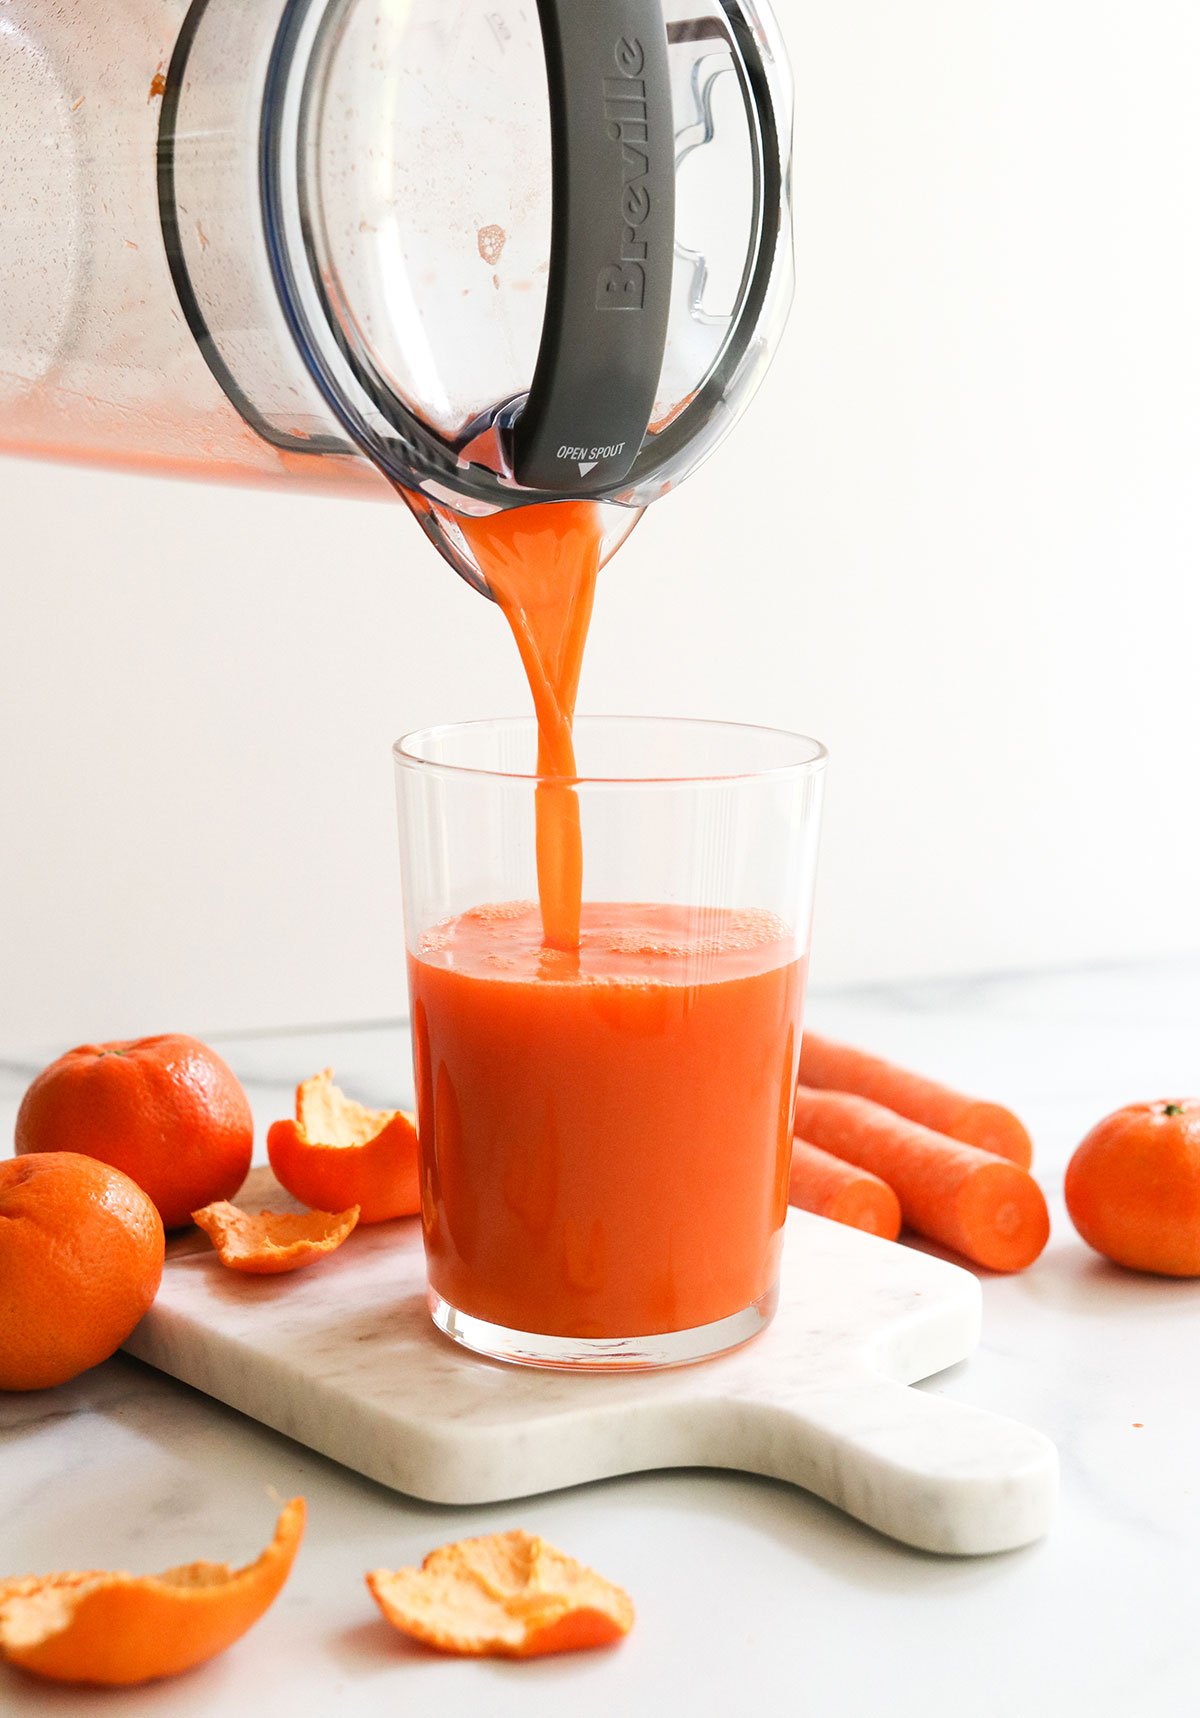 Carrot juice poured into a glass from a direct angle.